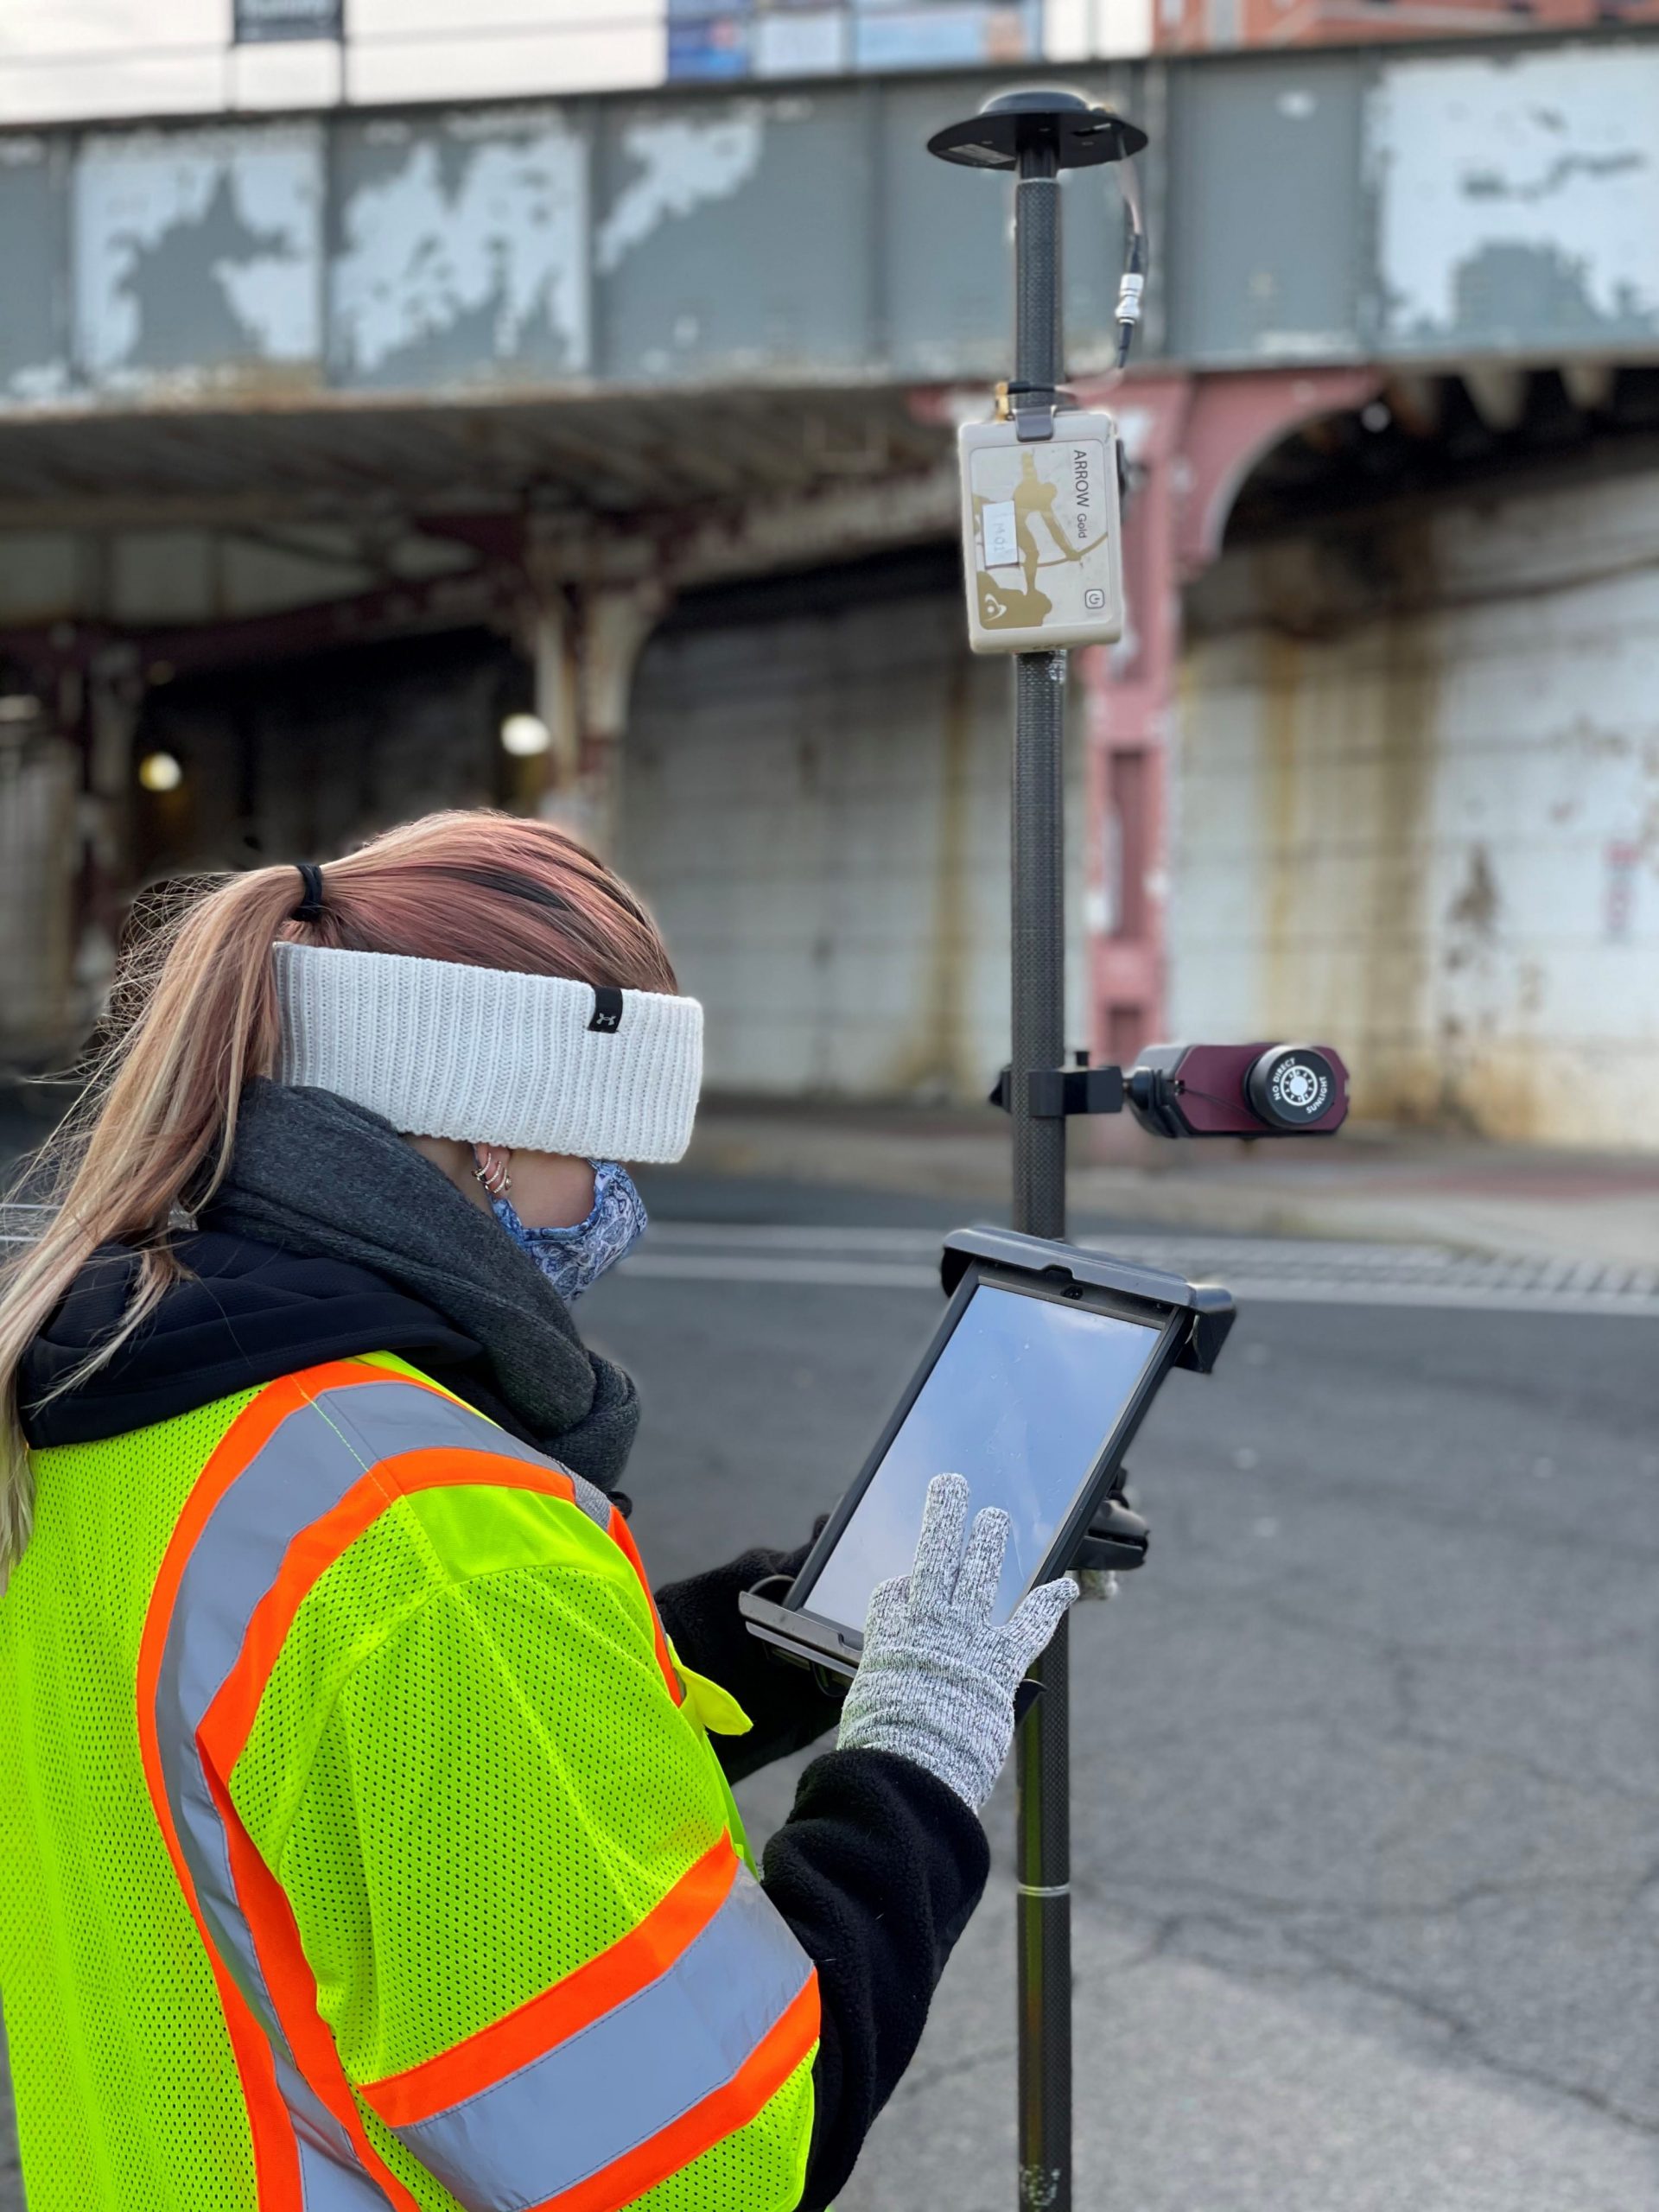 Amanda Paton uses Laser GIS mobile mapping with Esri ArcGIS, Eos Arrow Gold GNSS receiver, and LTI Laser Tech TruPulse 200X rangefinder in New Jersey for Colliers Engineering & Design